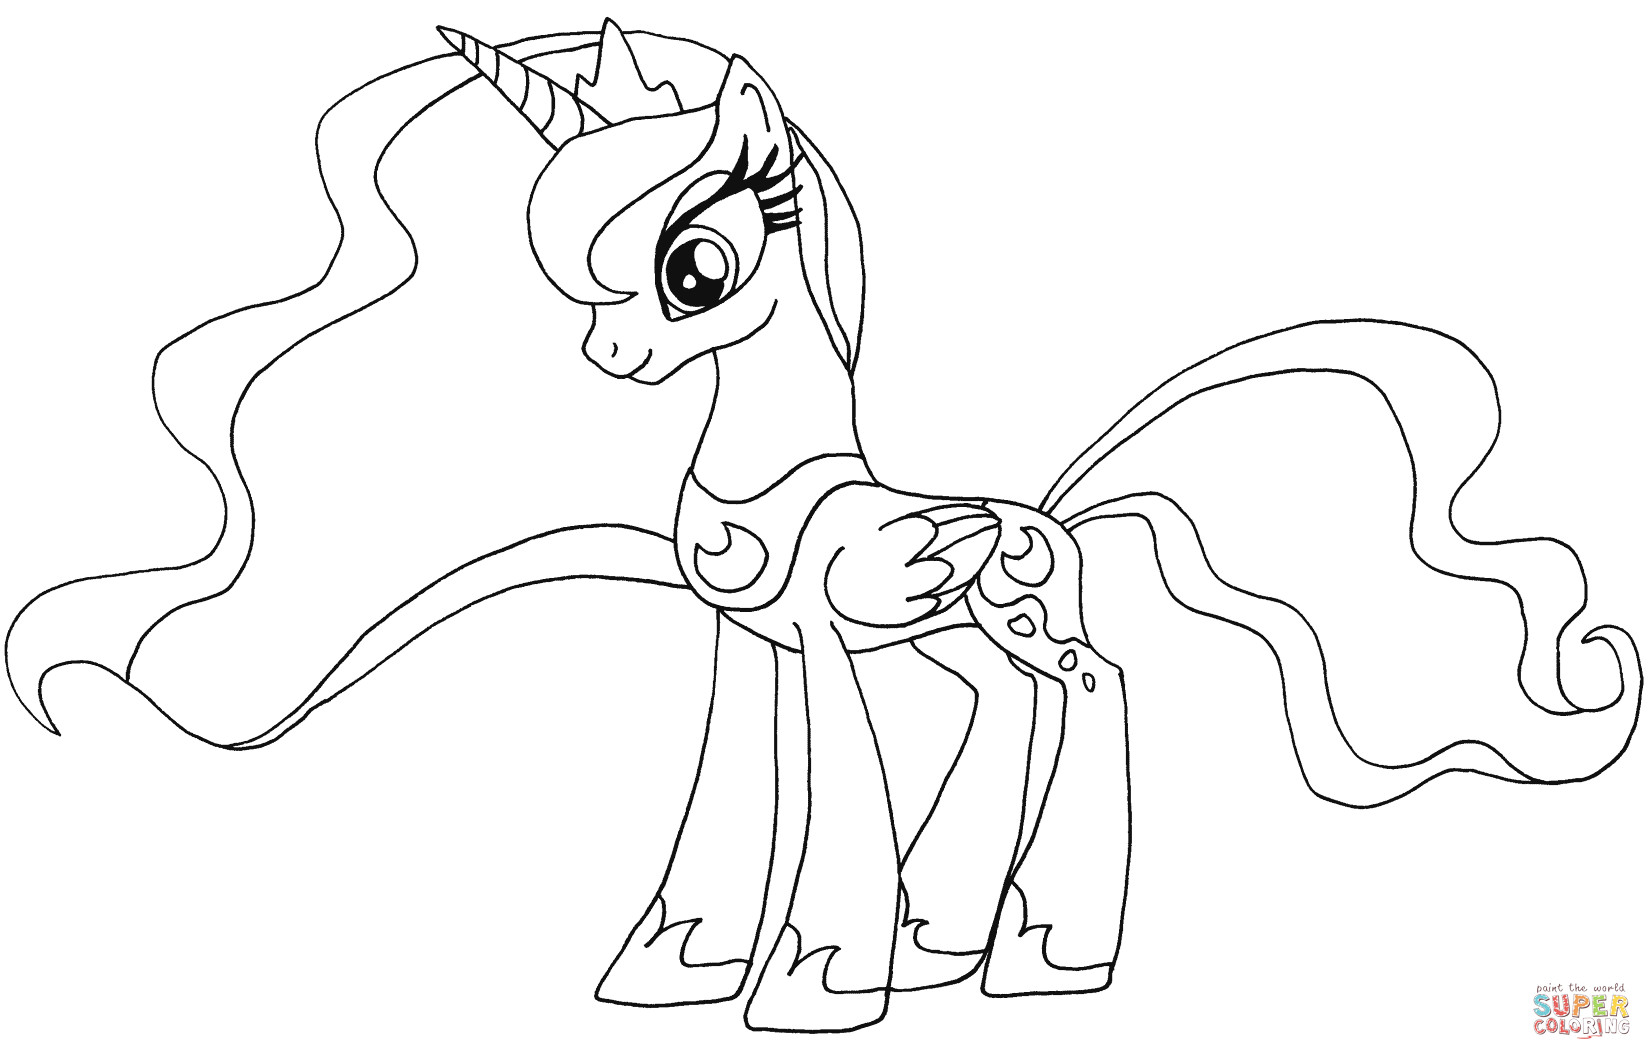 My Little Pony Coloring Pages Princess Luna
 My Little Pony Princess Luna coloring page